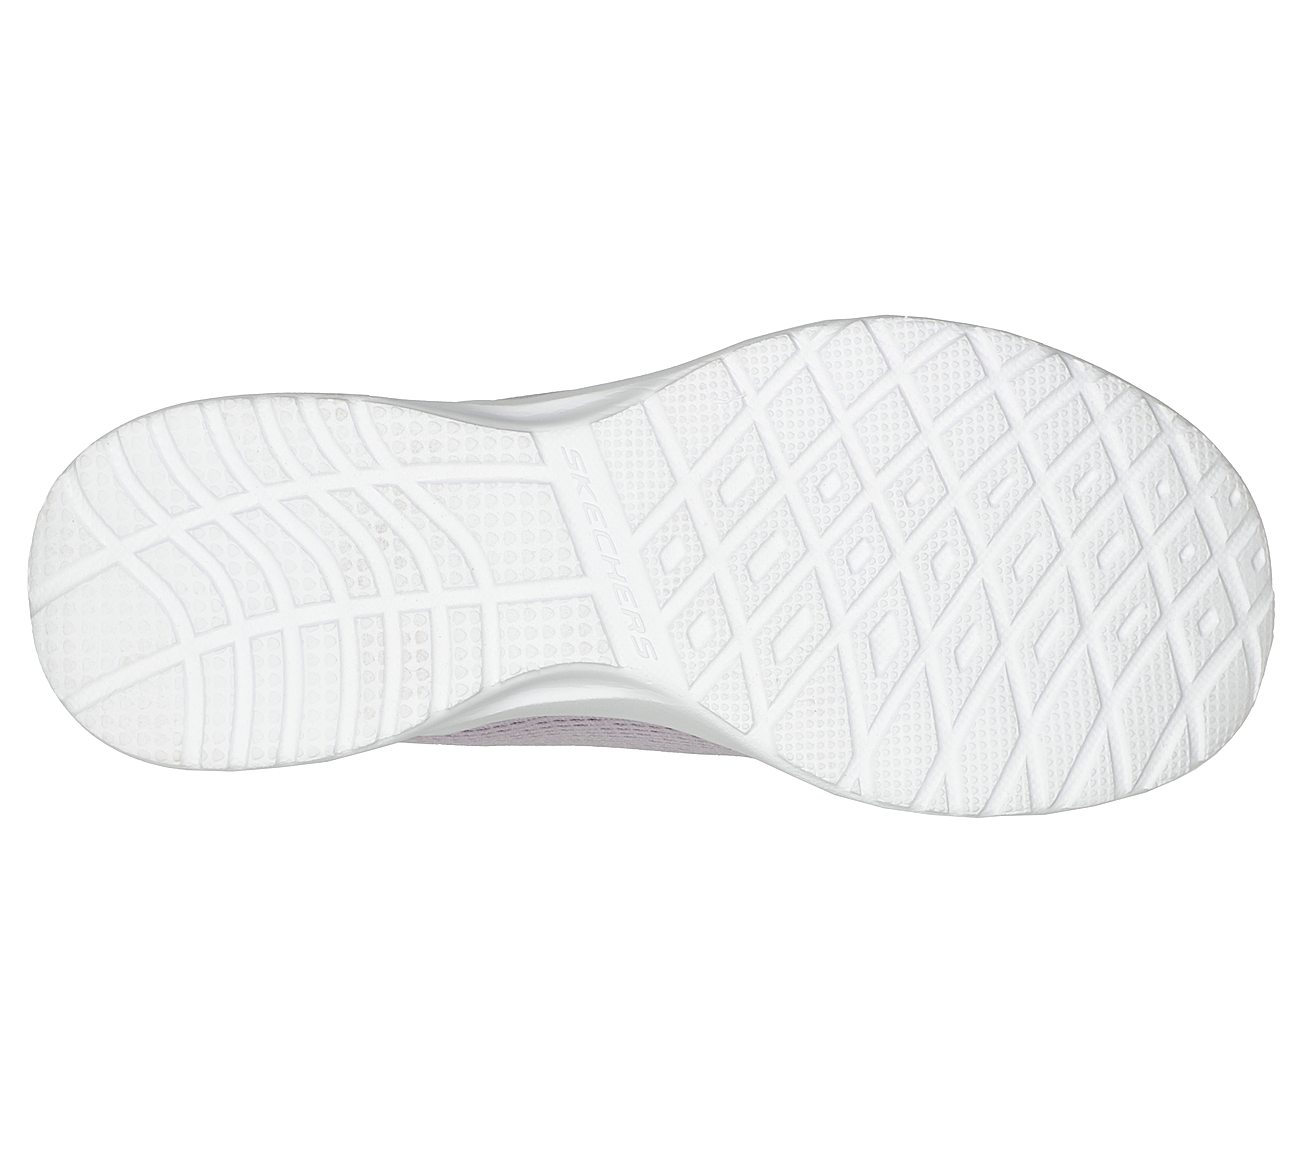 SKECH-AIR DYNAMIGHT-LAID OUT, LAVENDER/MULTI Footwear Bottom View